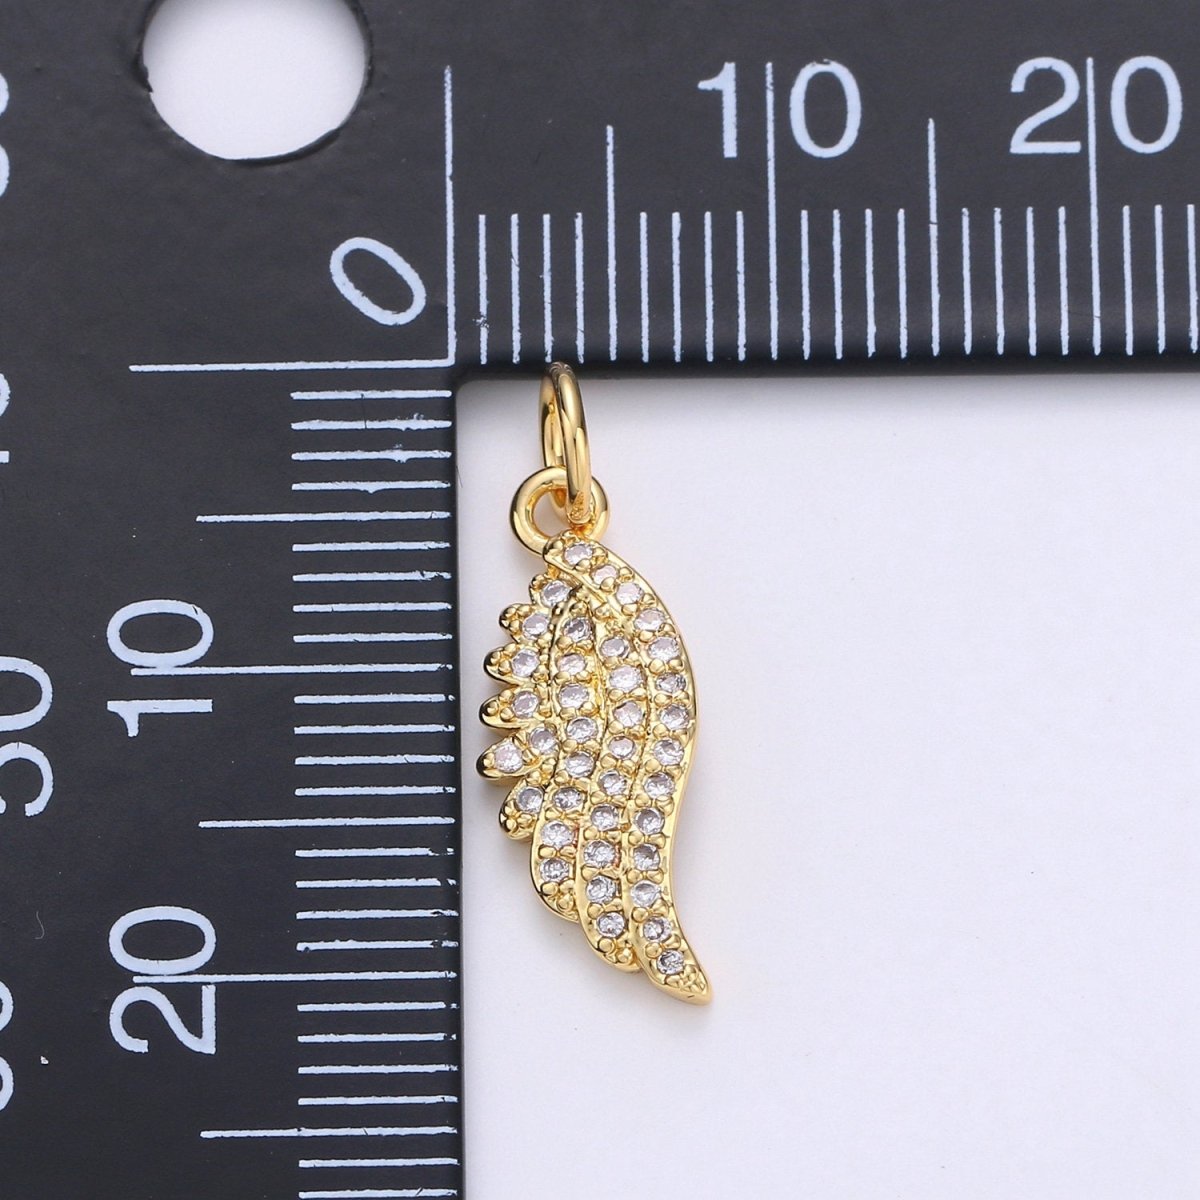 14k Gold Filled Small Gold Angel Wing Charm - Tiny Add on Charm - Delicate Feather Pendant for Bracelet, Necklace, Earring Component, D-255 - DLUXCA